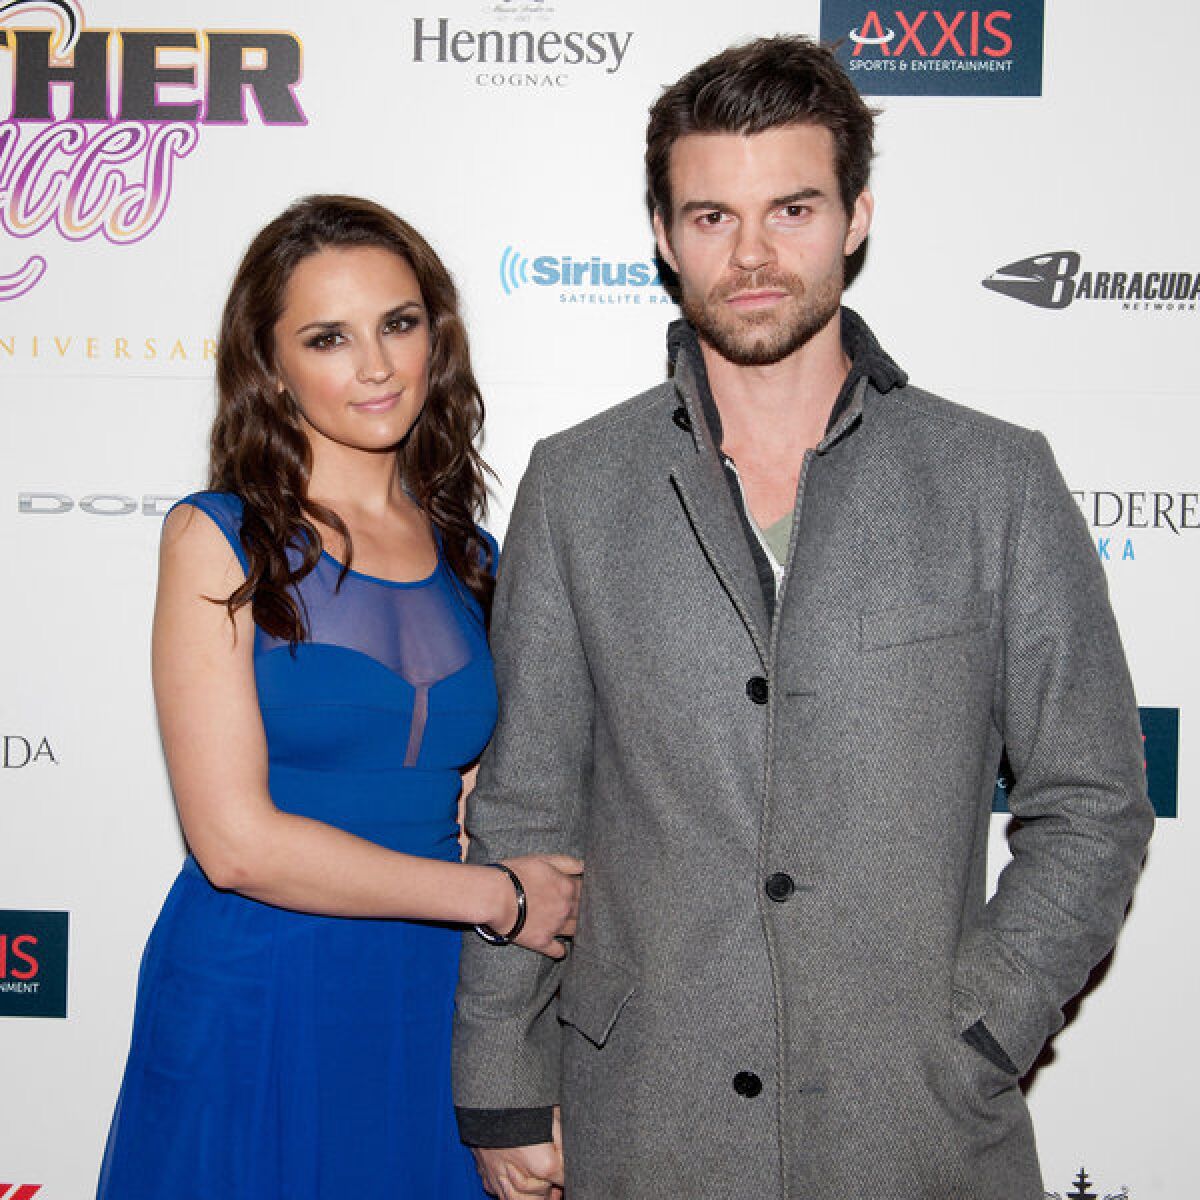 Rachael Leigh Cook and Daniel Gillies are expecting a baby together.